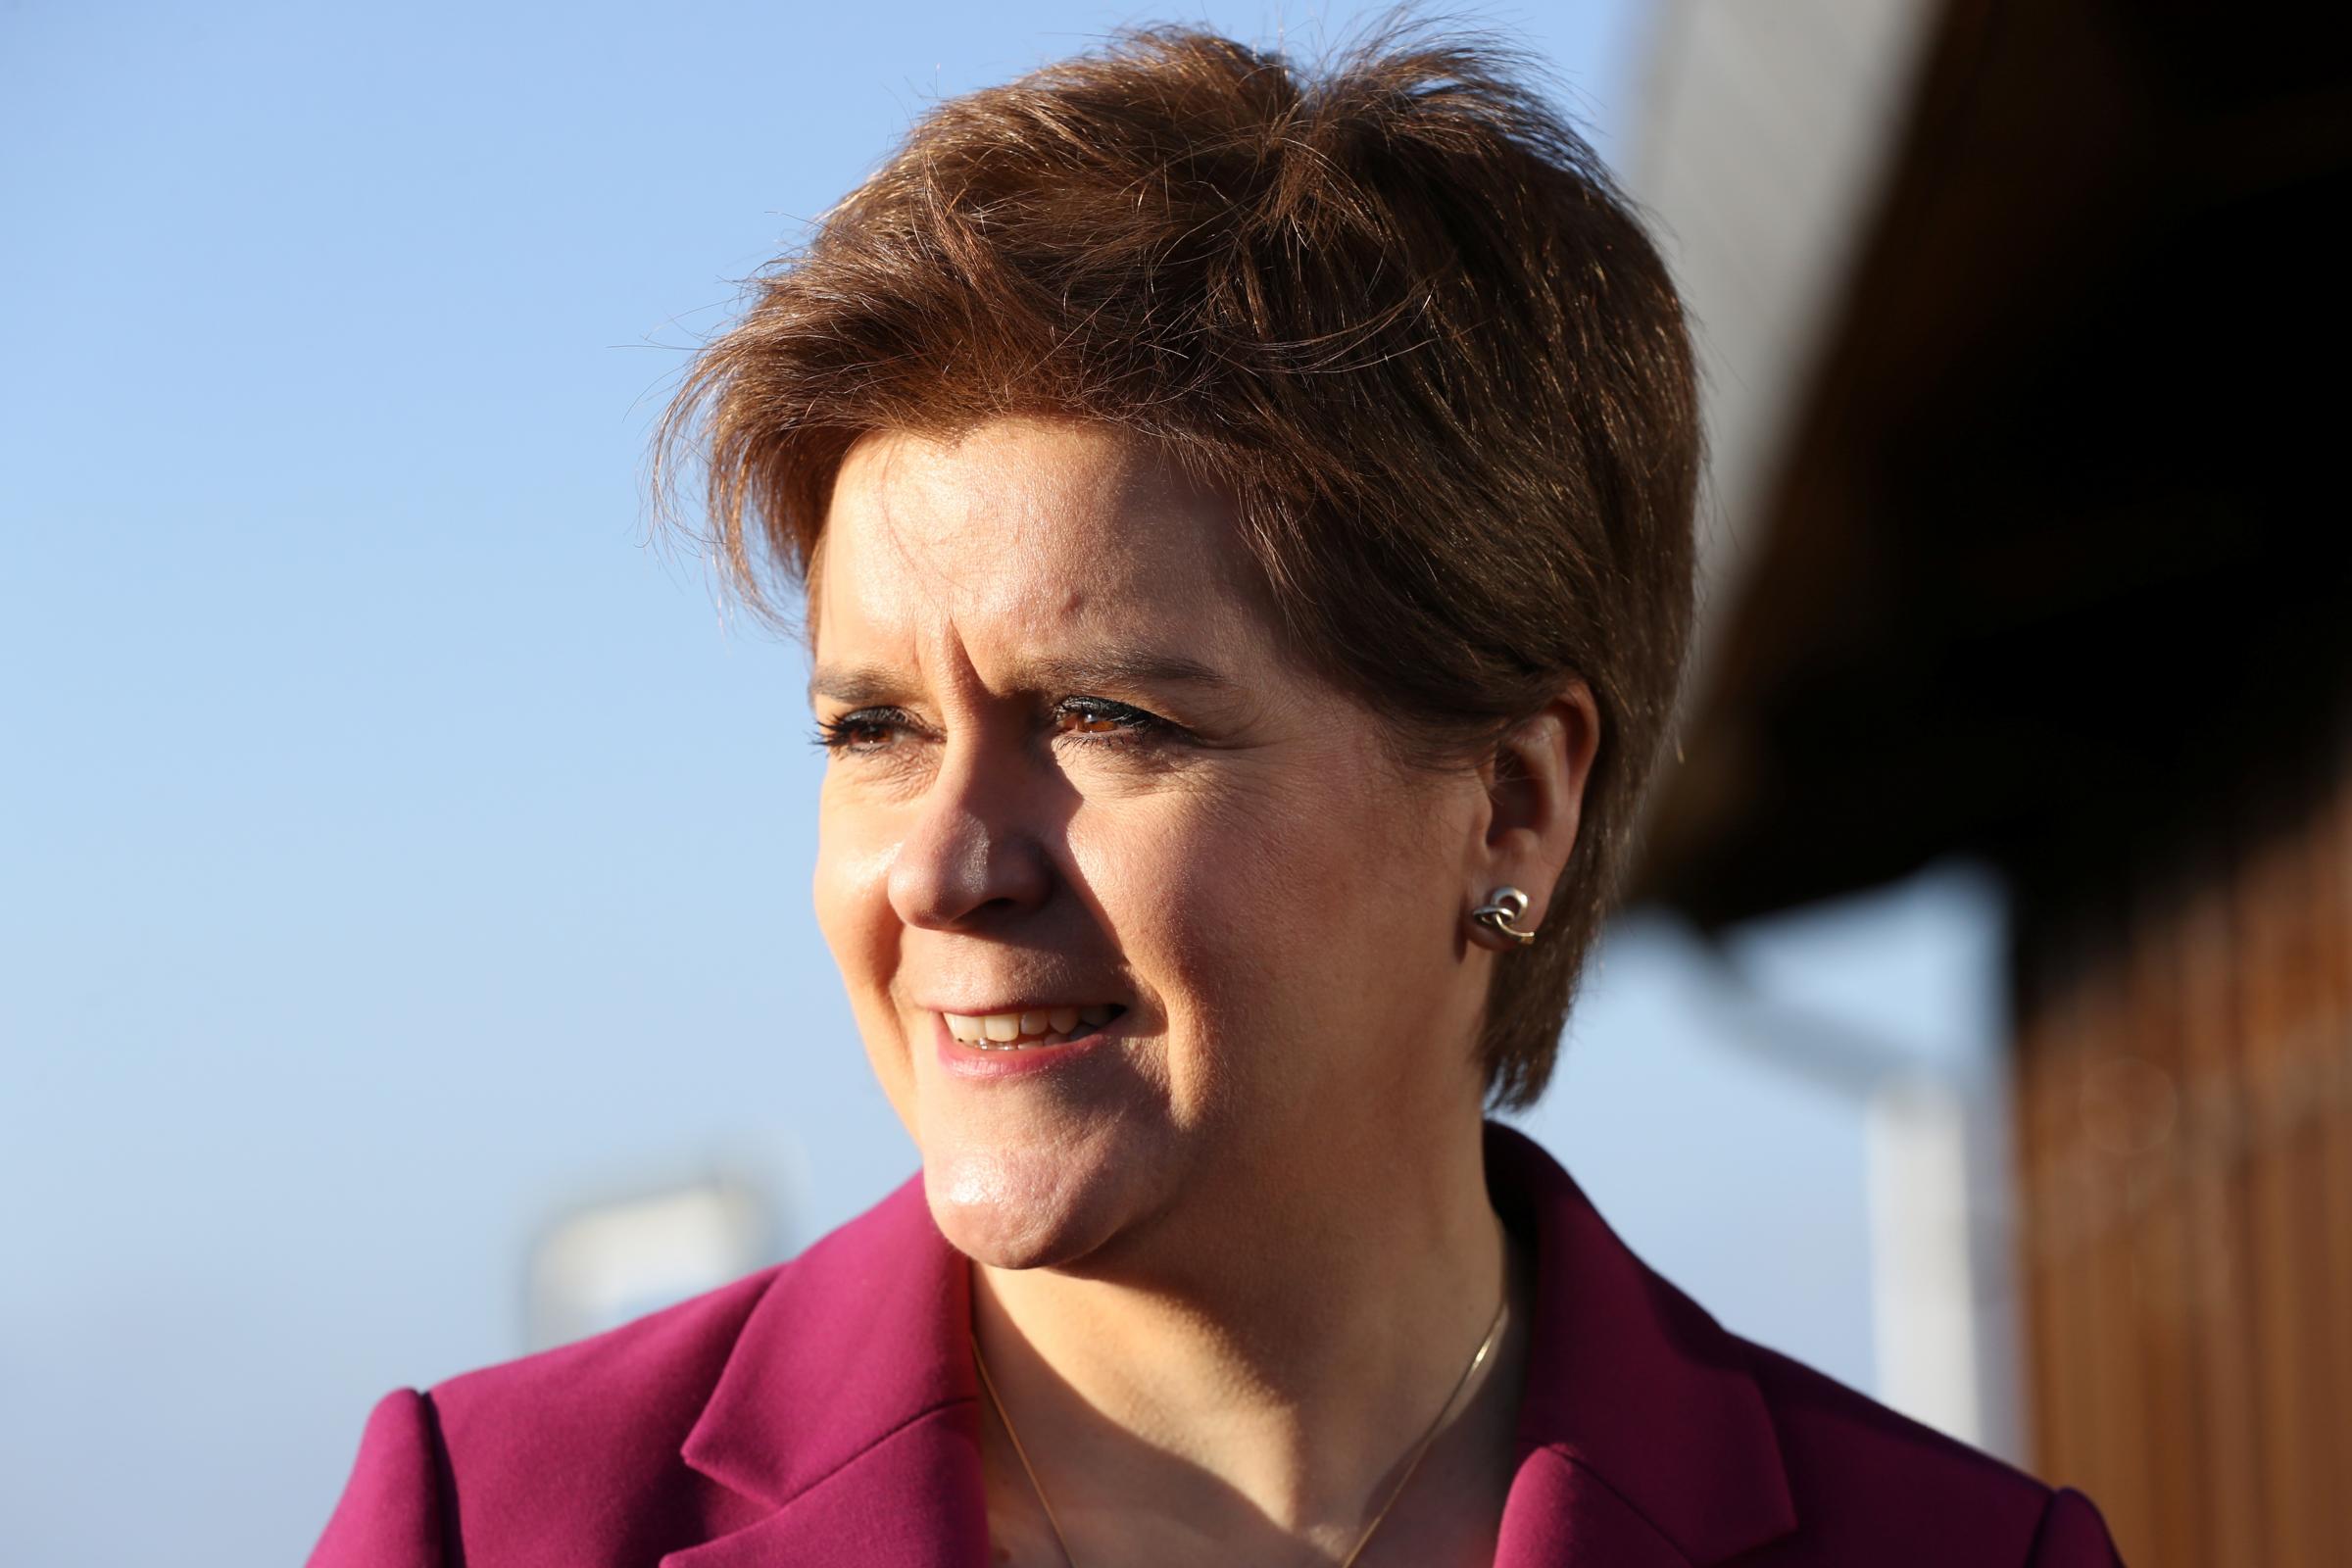 Nicola Sturgeon Covid announcement today - what time and watch update live